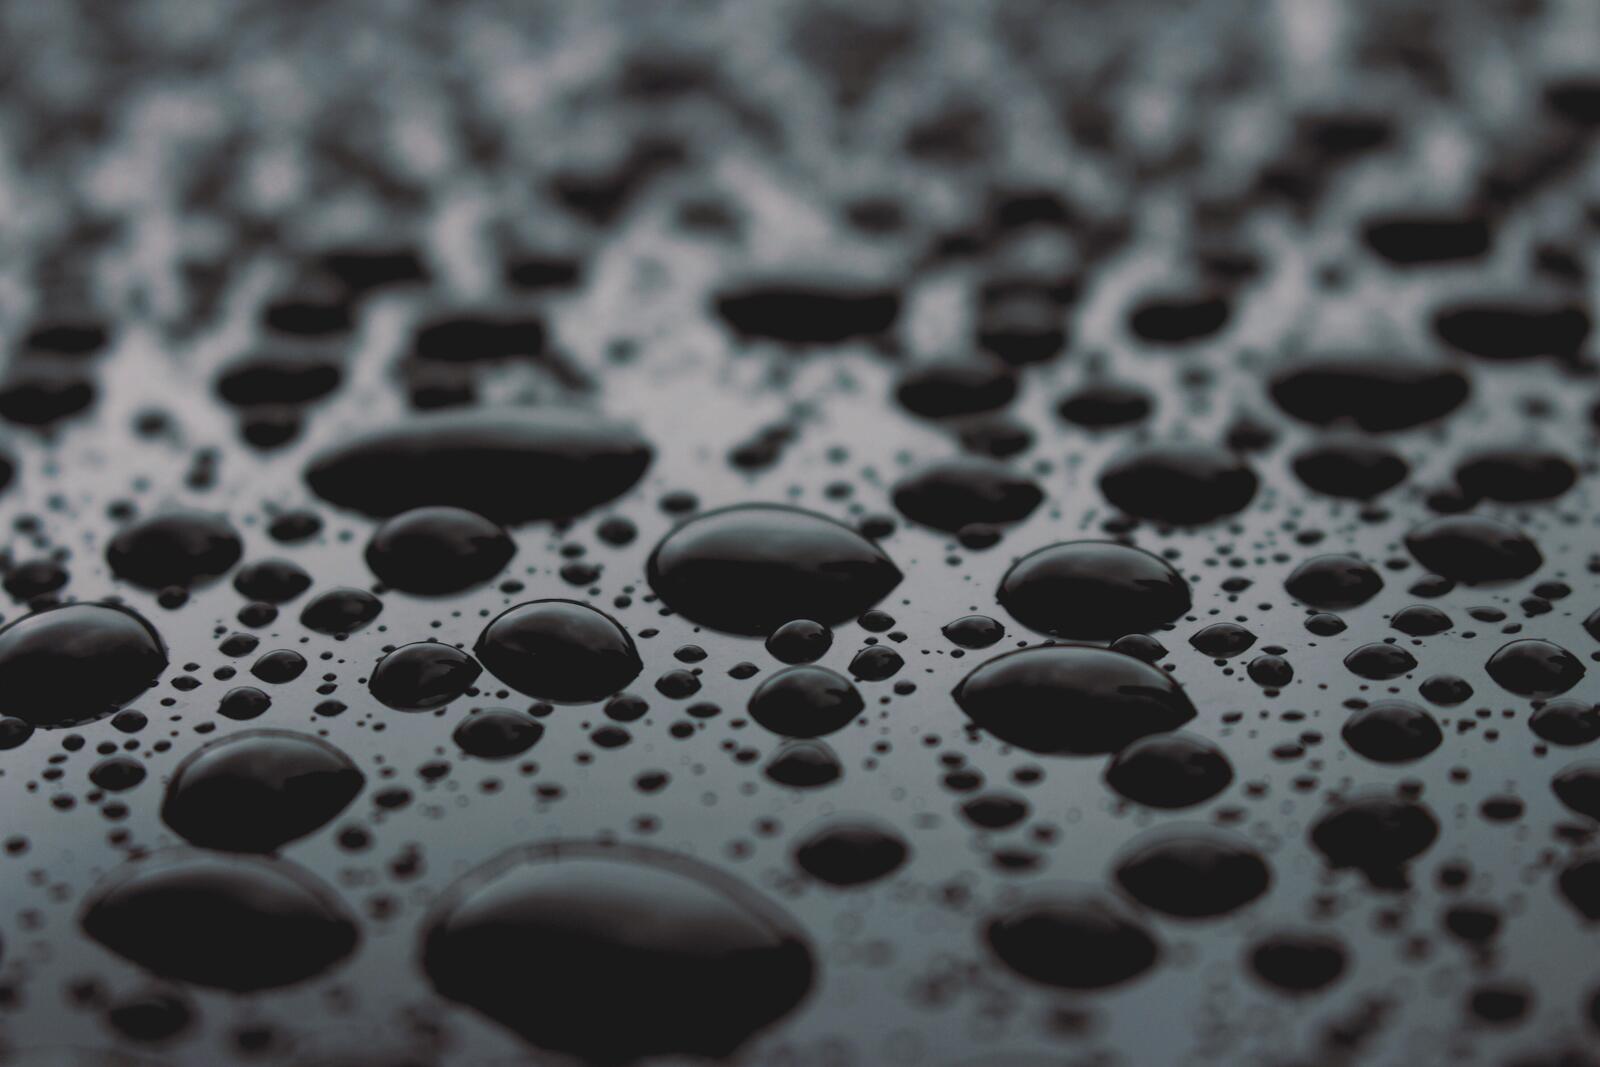 Free photo Wallpaper with water droplets on a glass surface